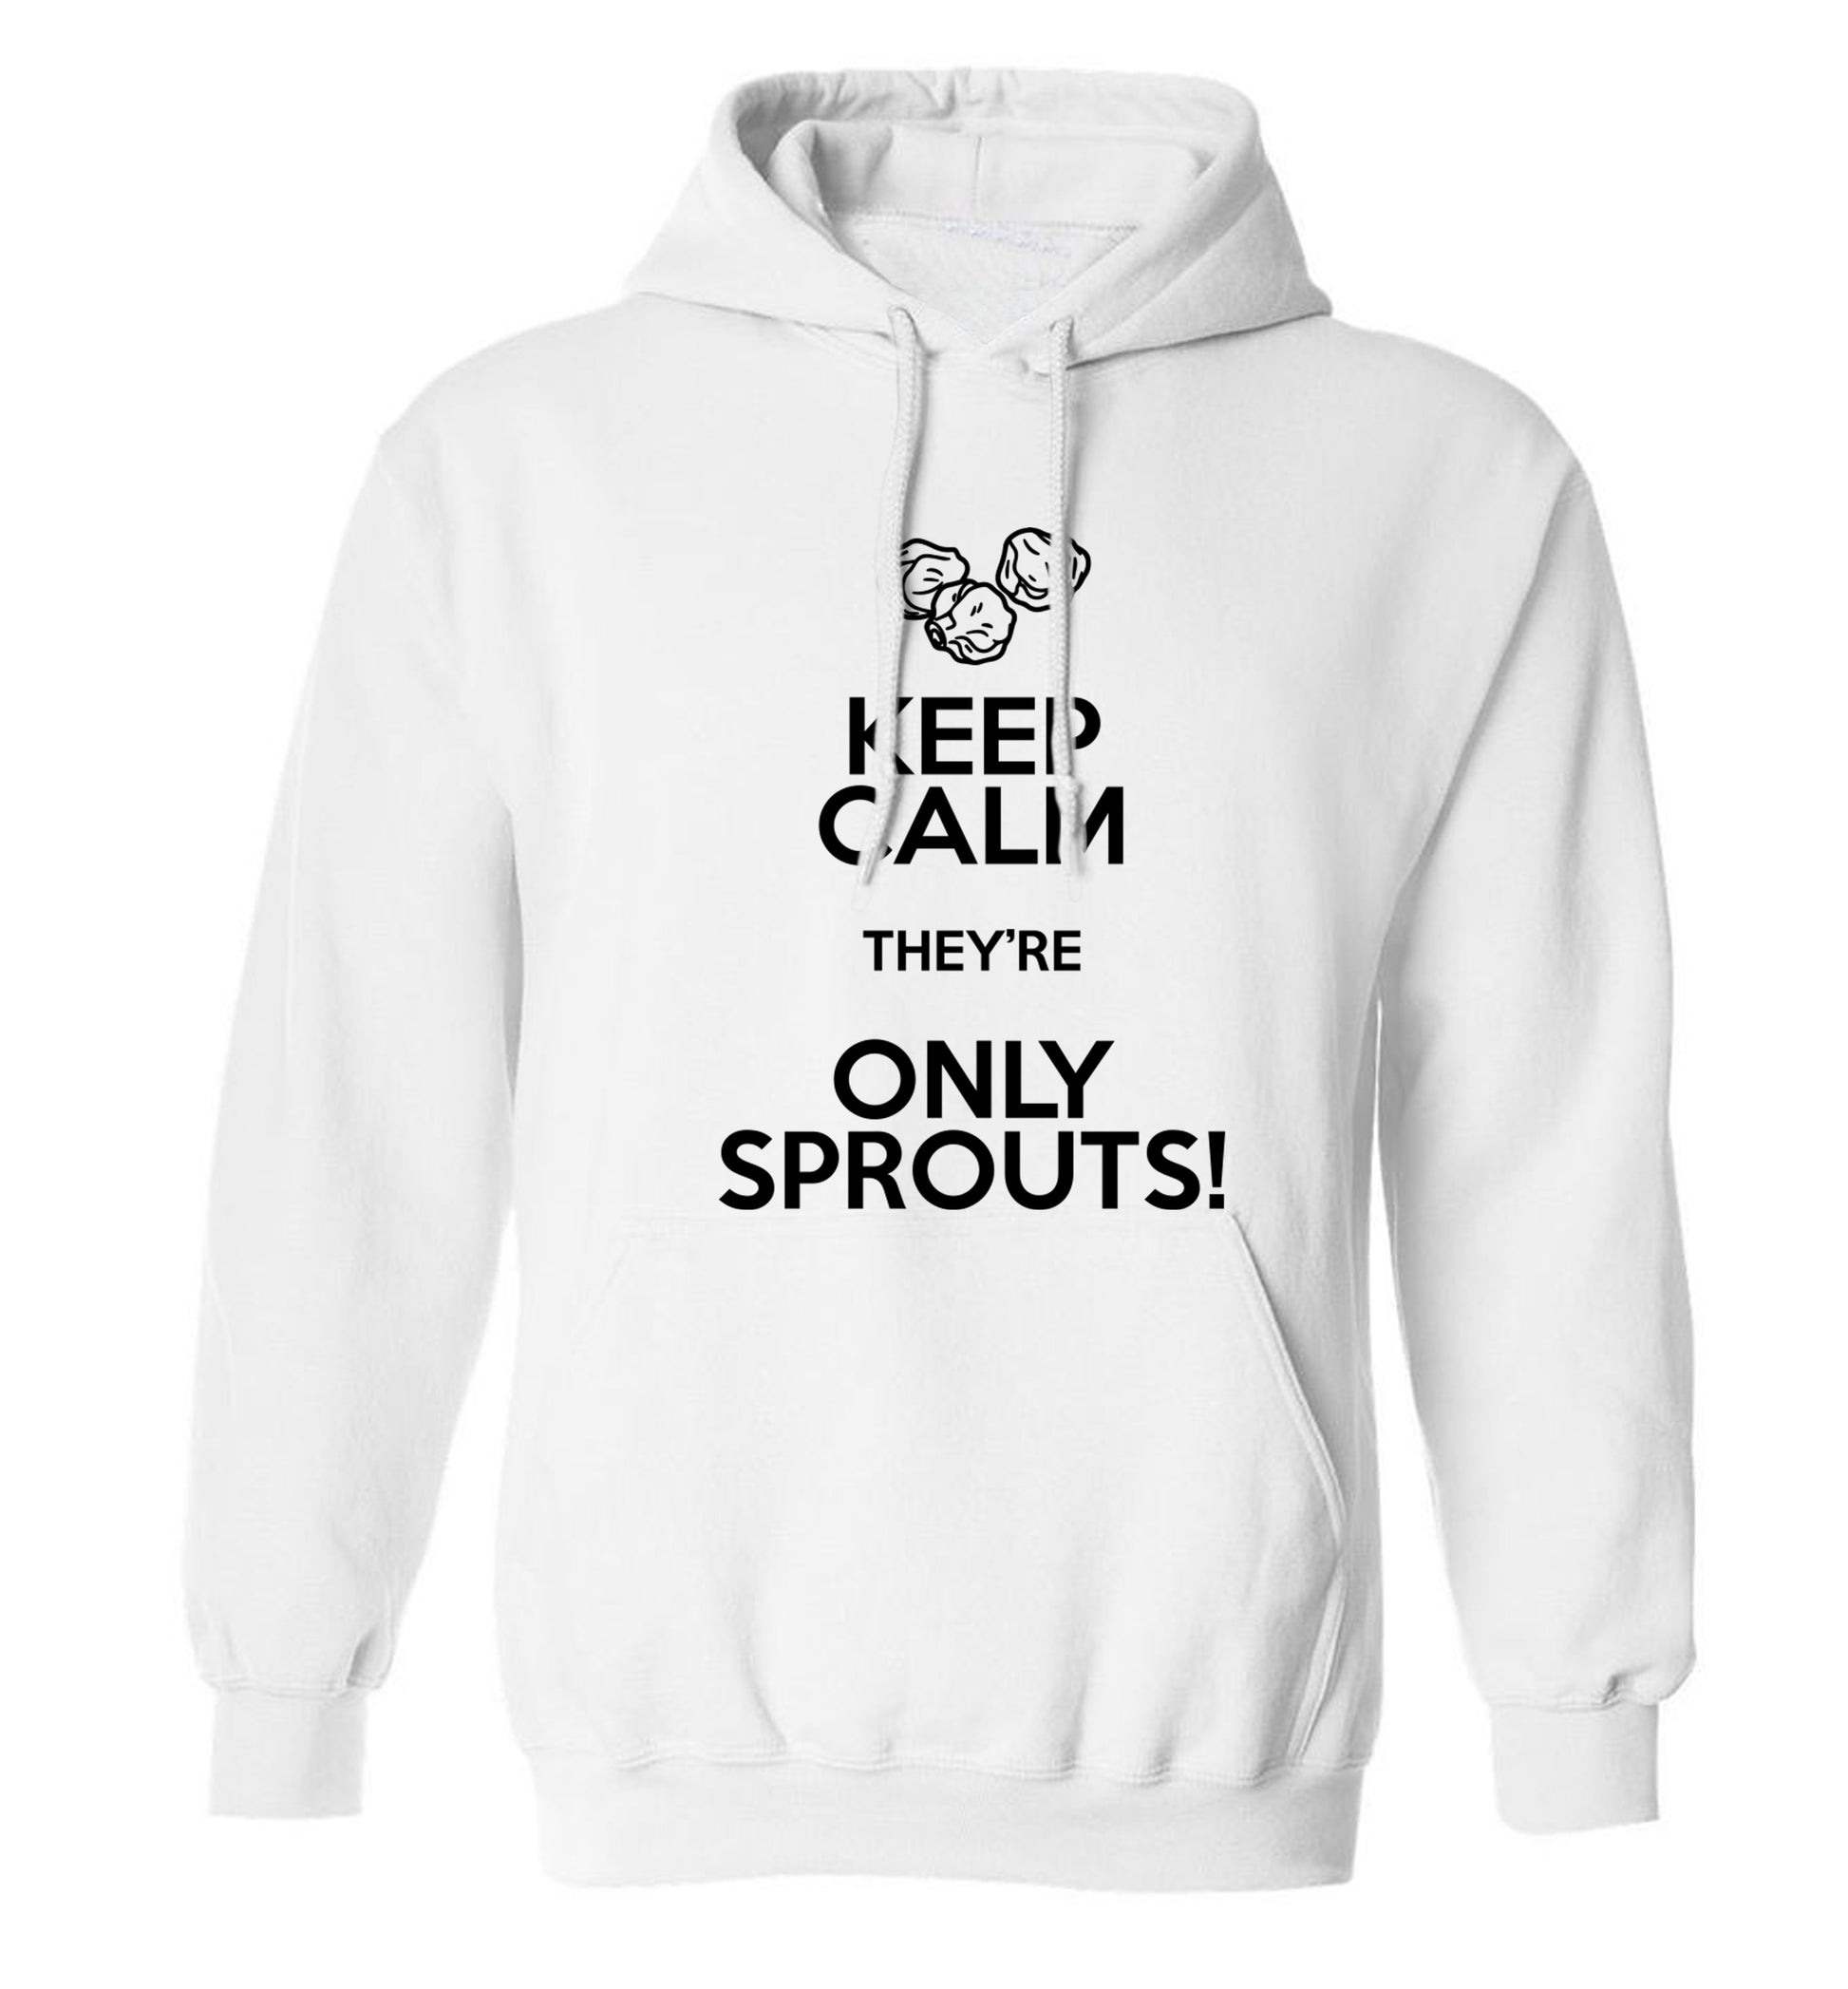 Keep calm they're only sprouts adults unisex white hoodie 2XL